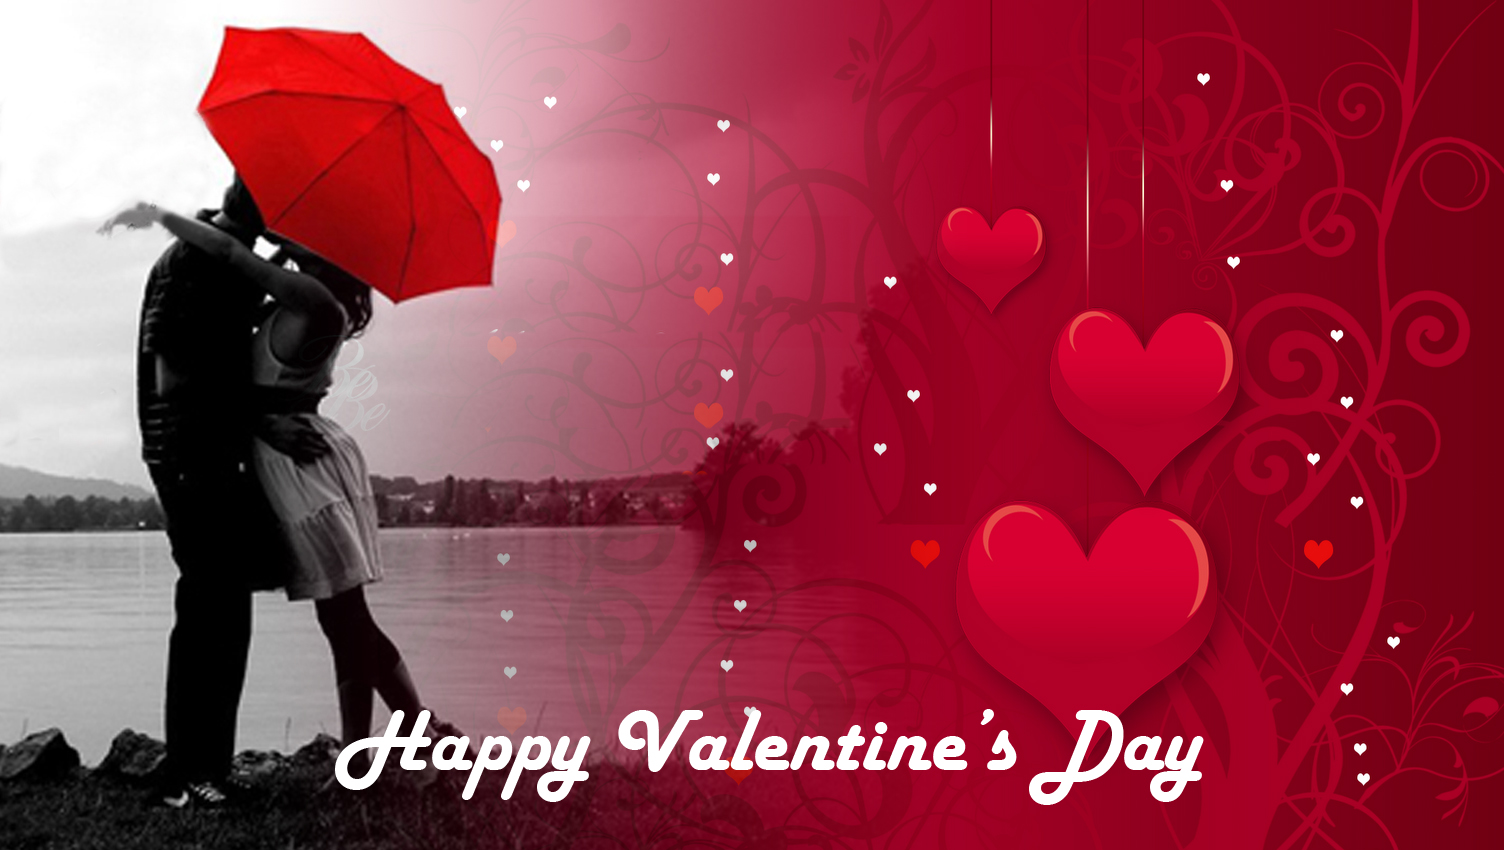 Best 10 Funny Valentines Day Quotes And Sayings